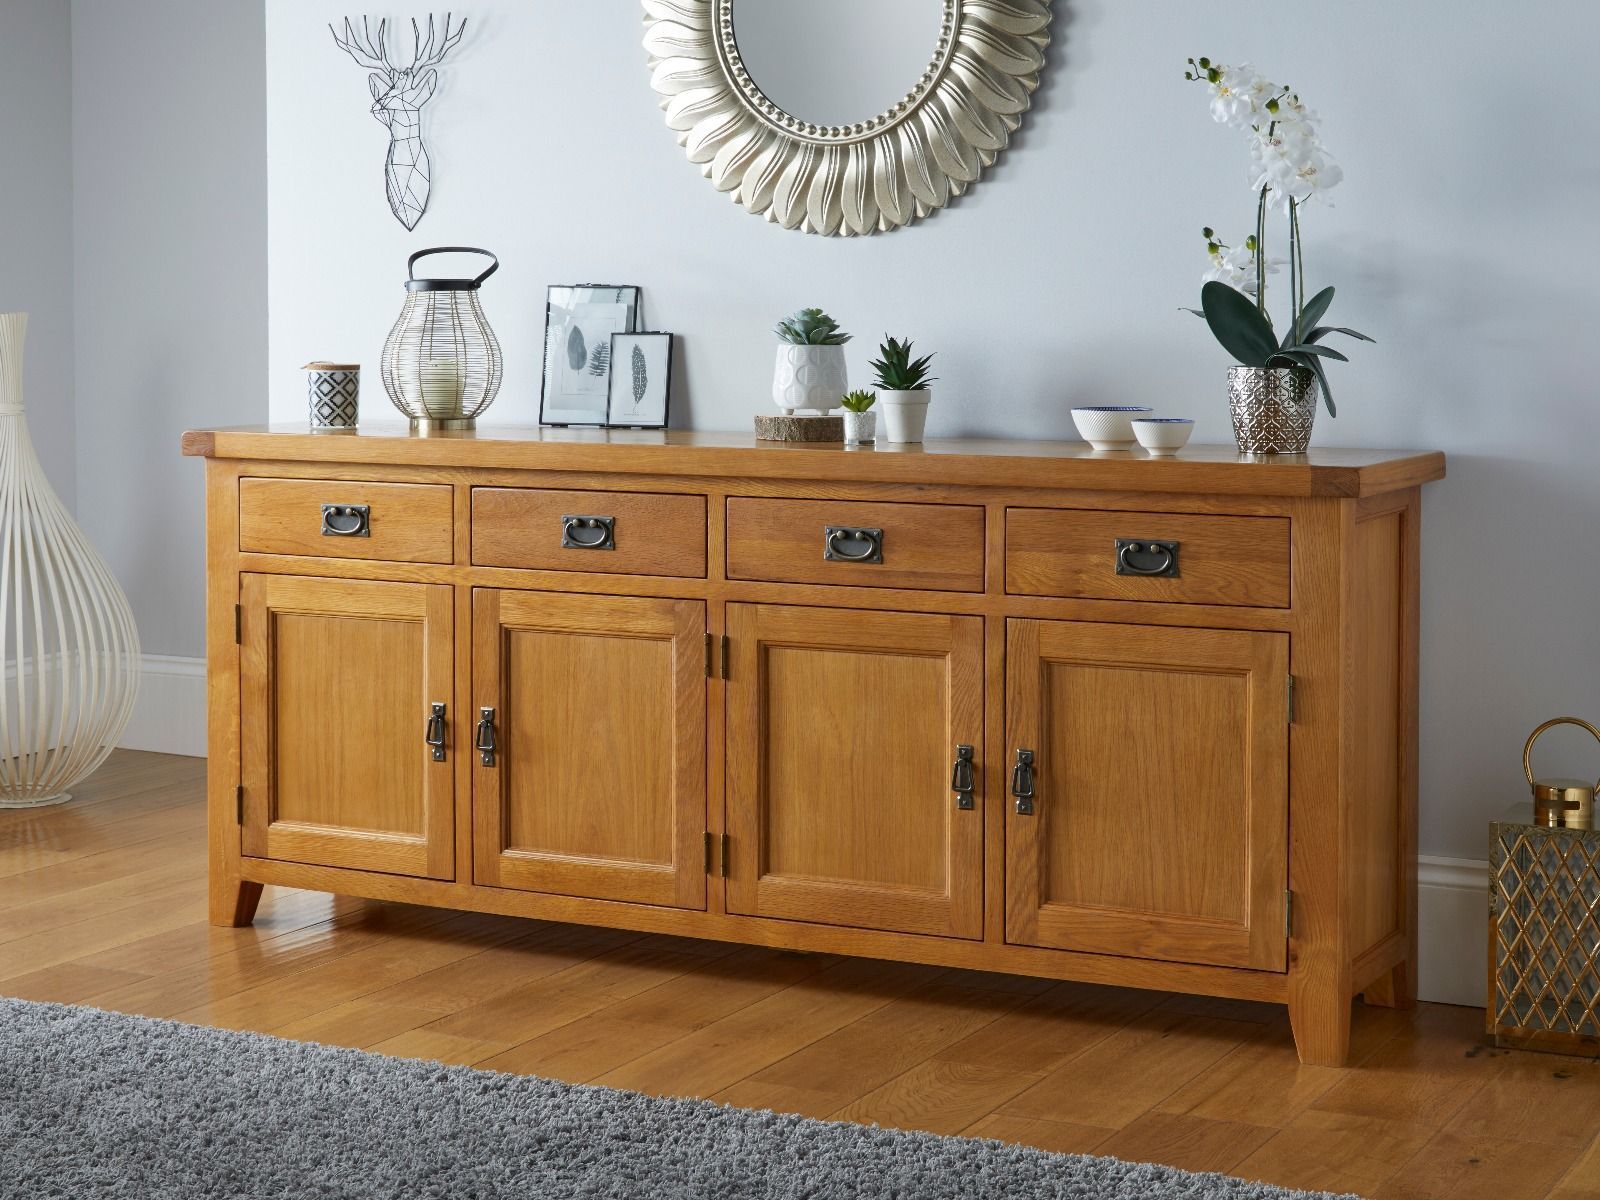 Large Country Oak Sideboard 200cm – Free Delivery | Top Furniture For Most Recent 4 Door Sideboards (View 12 of 15)